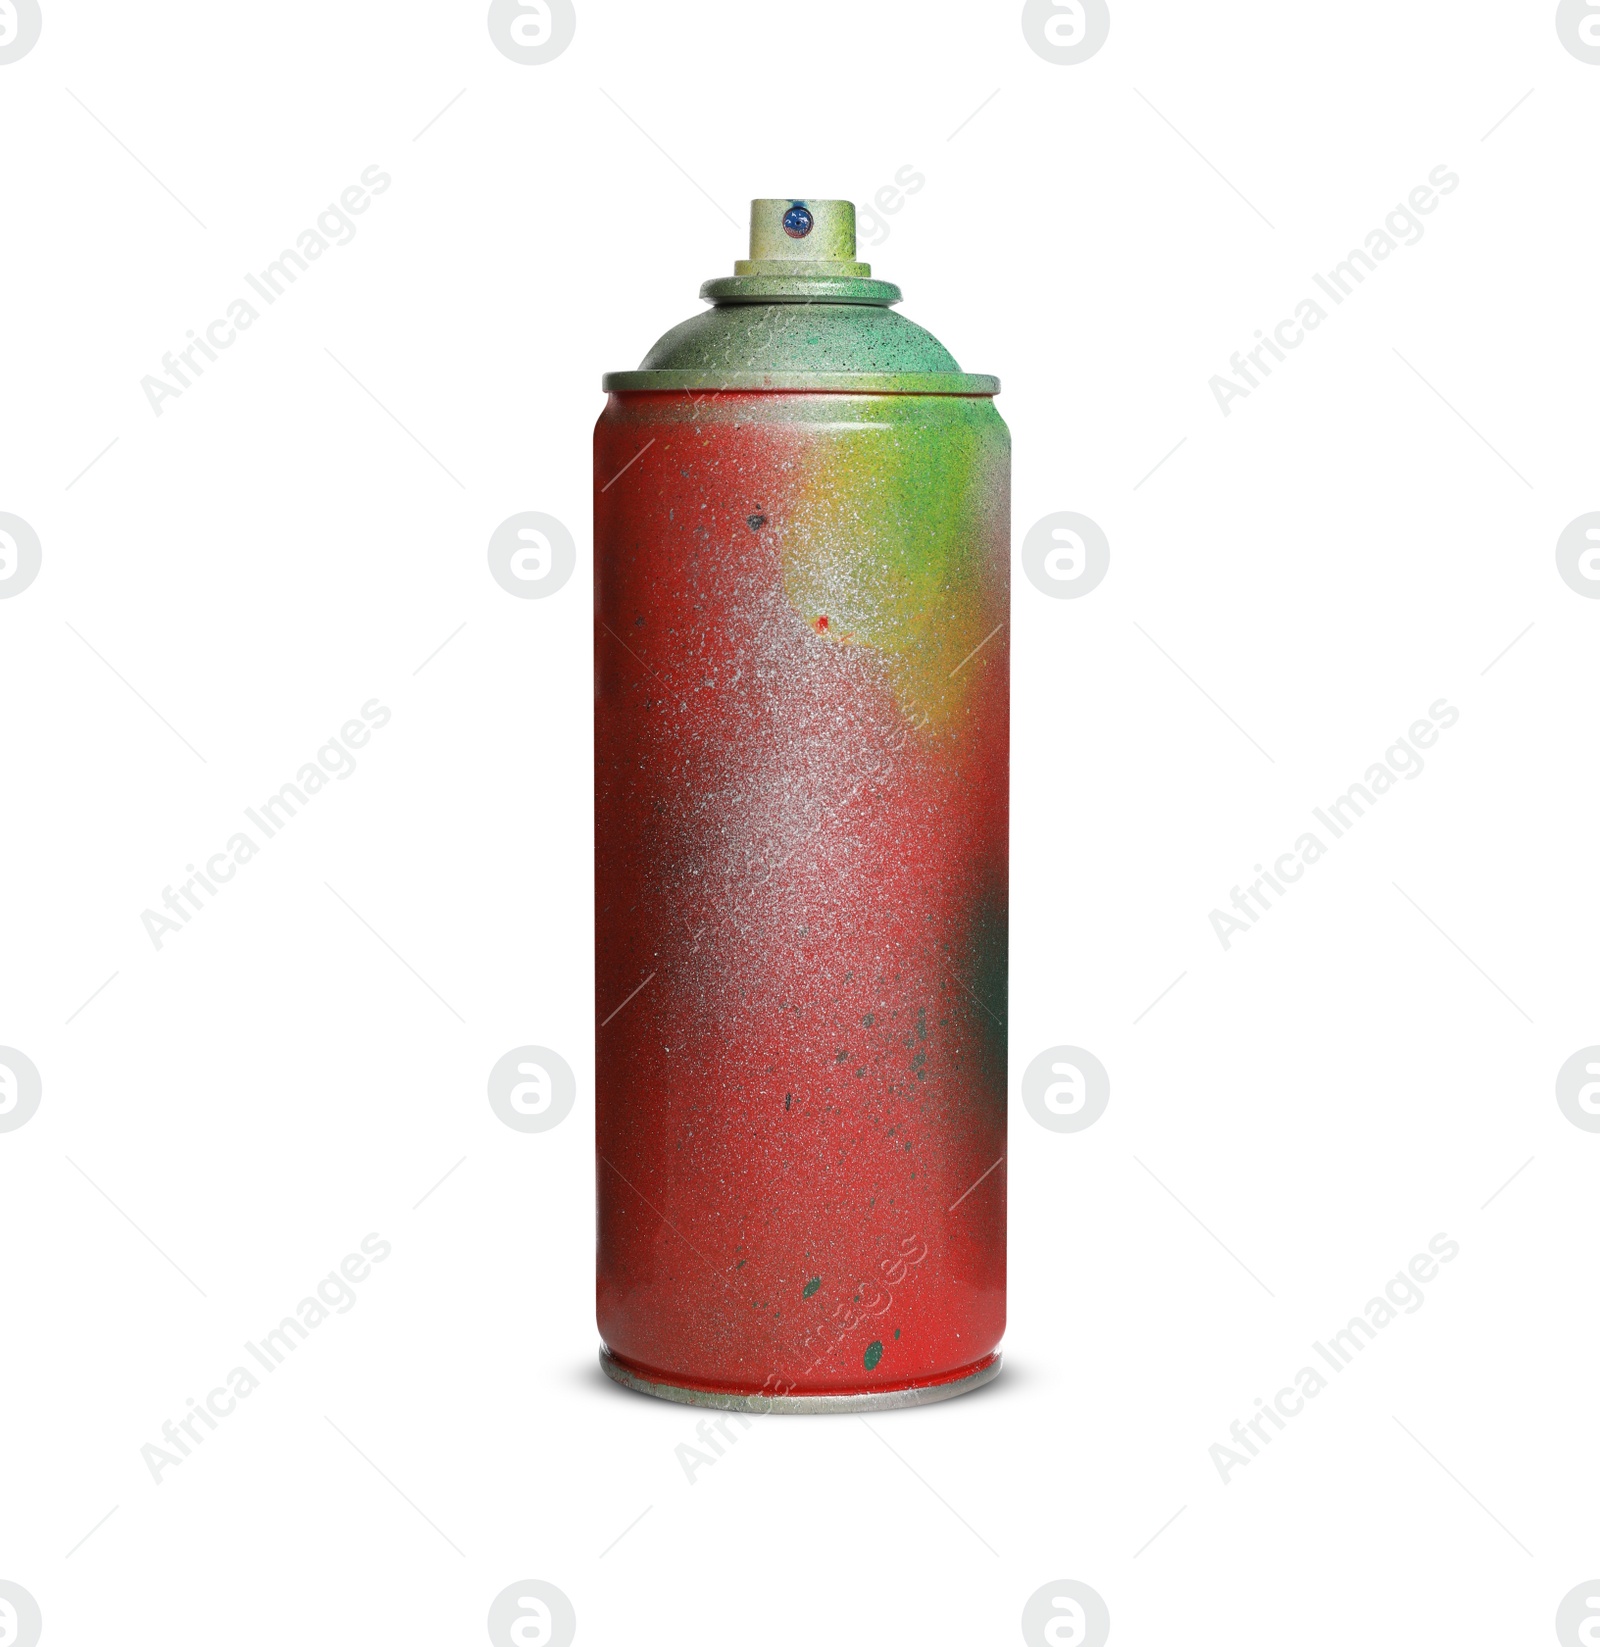 Photo of Used can of spray paint on white background